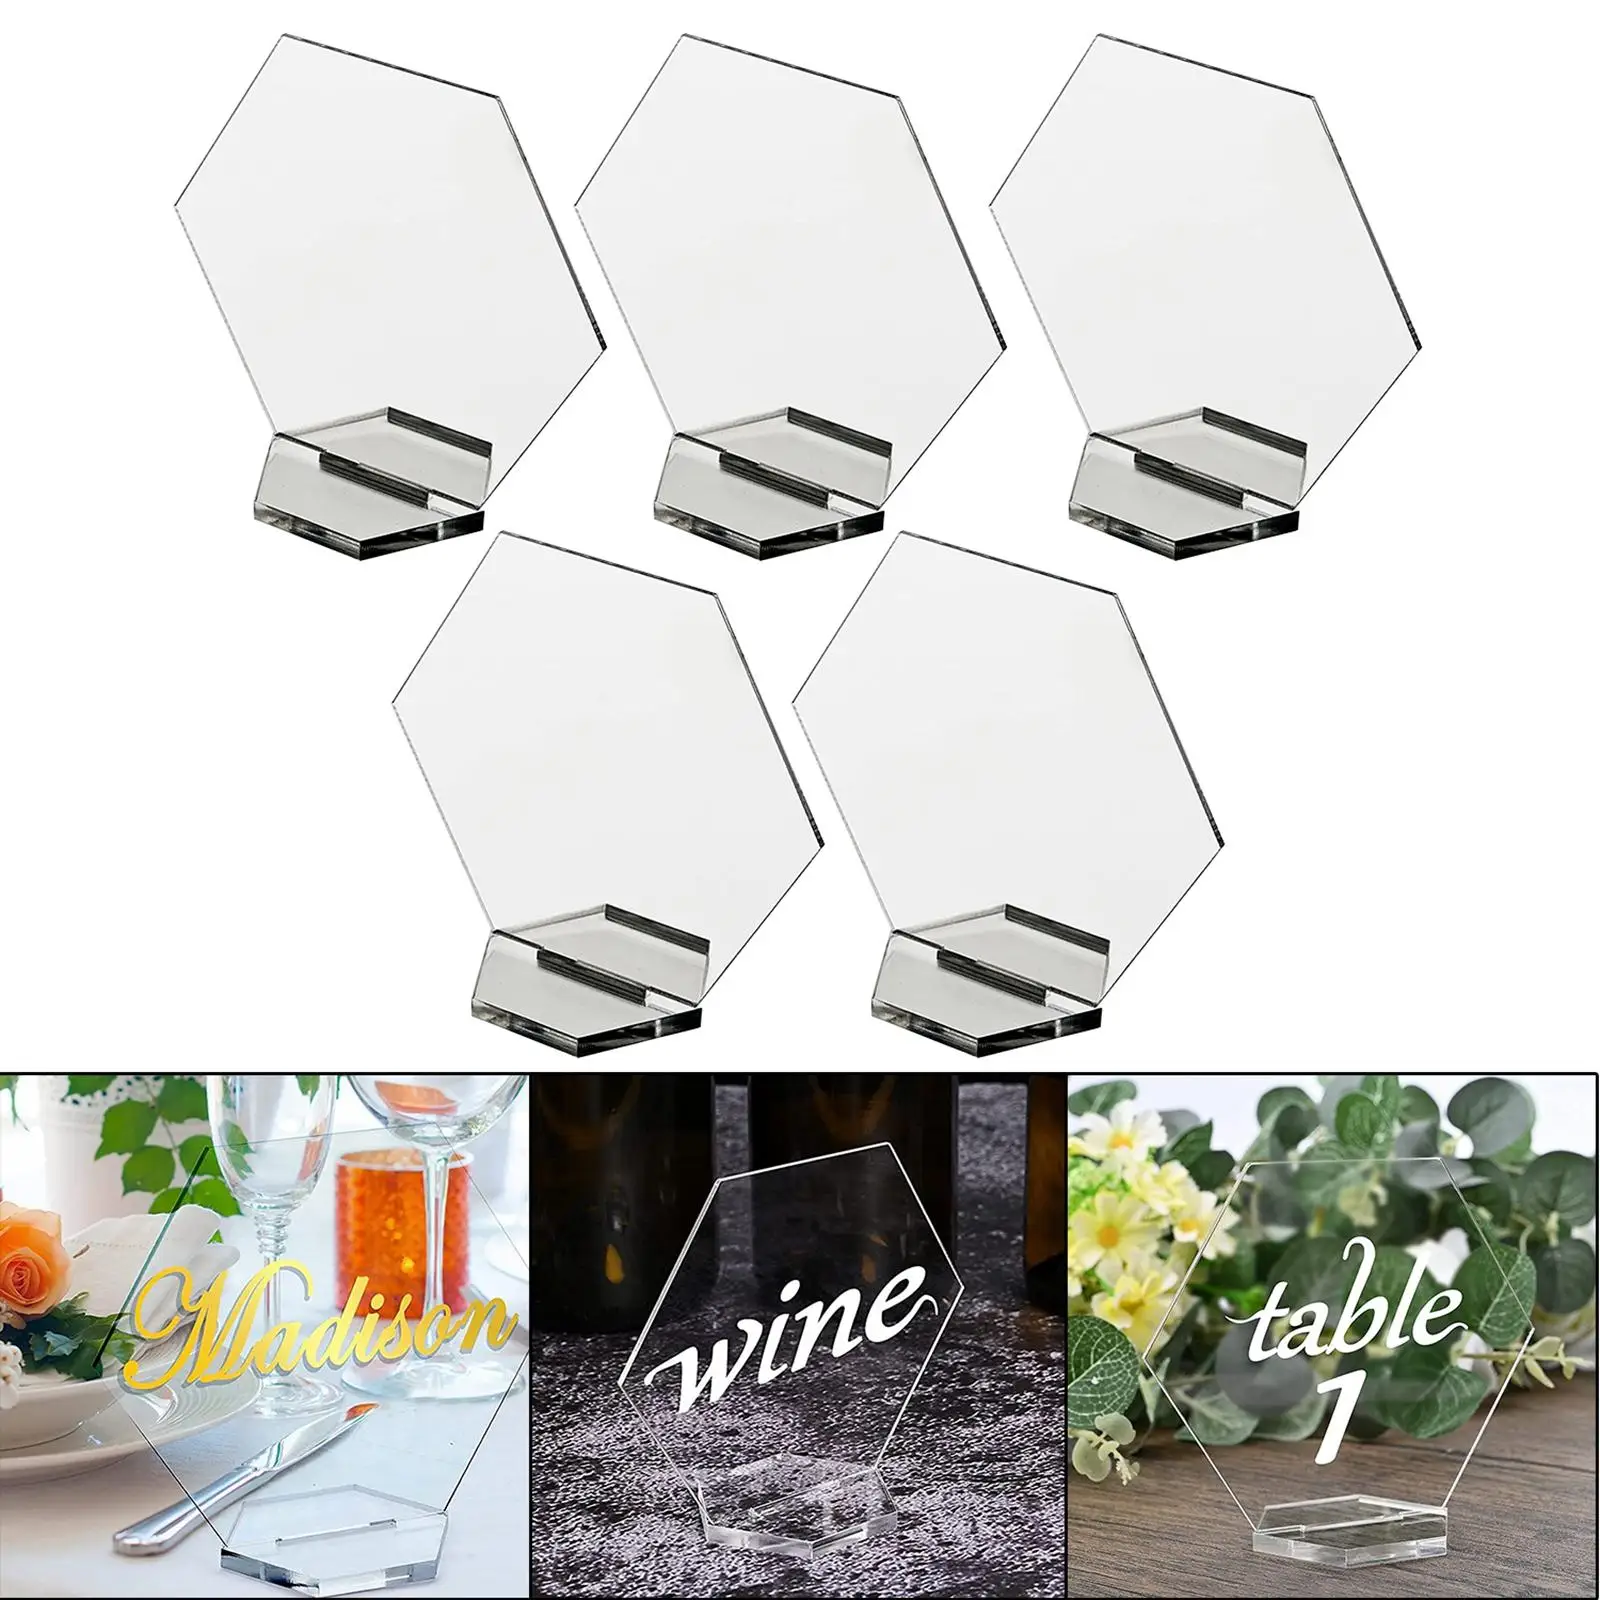 5 Pieces Clear Place Card for Table Hexagon Acrylic Place Card Sign Blanks Guest Names Card for Wedding Birthday Party Decor